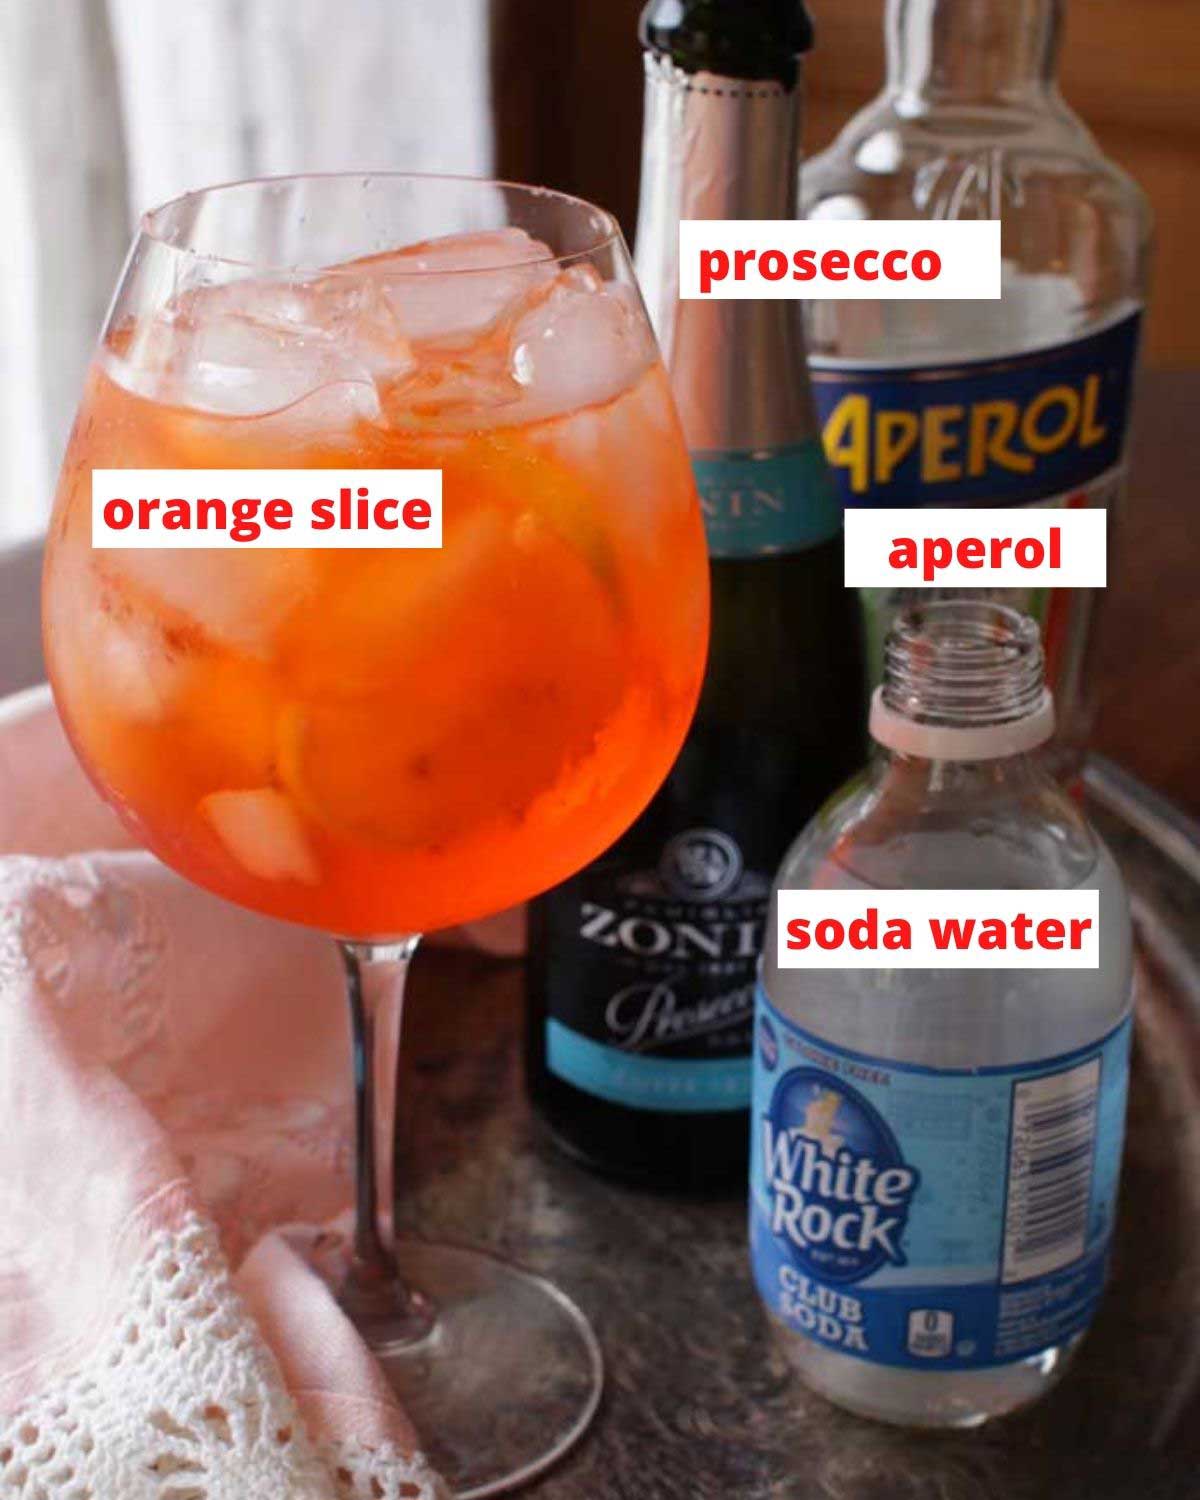 an aperol spritz on a brown table next to a bottle of prosecco, club soda and aperol